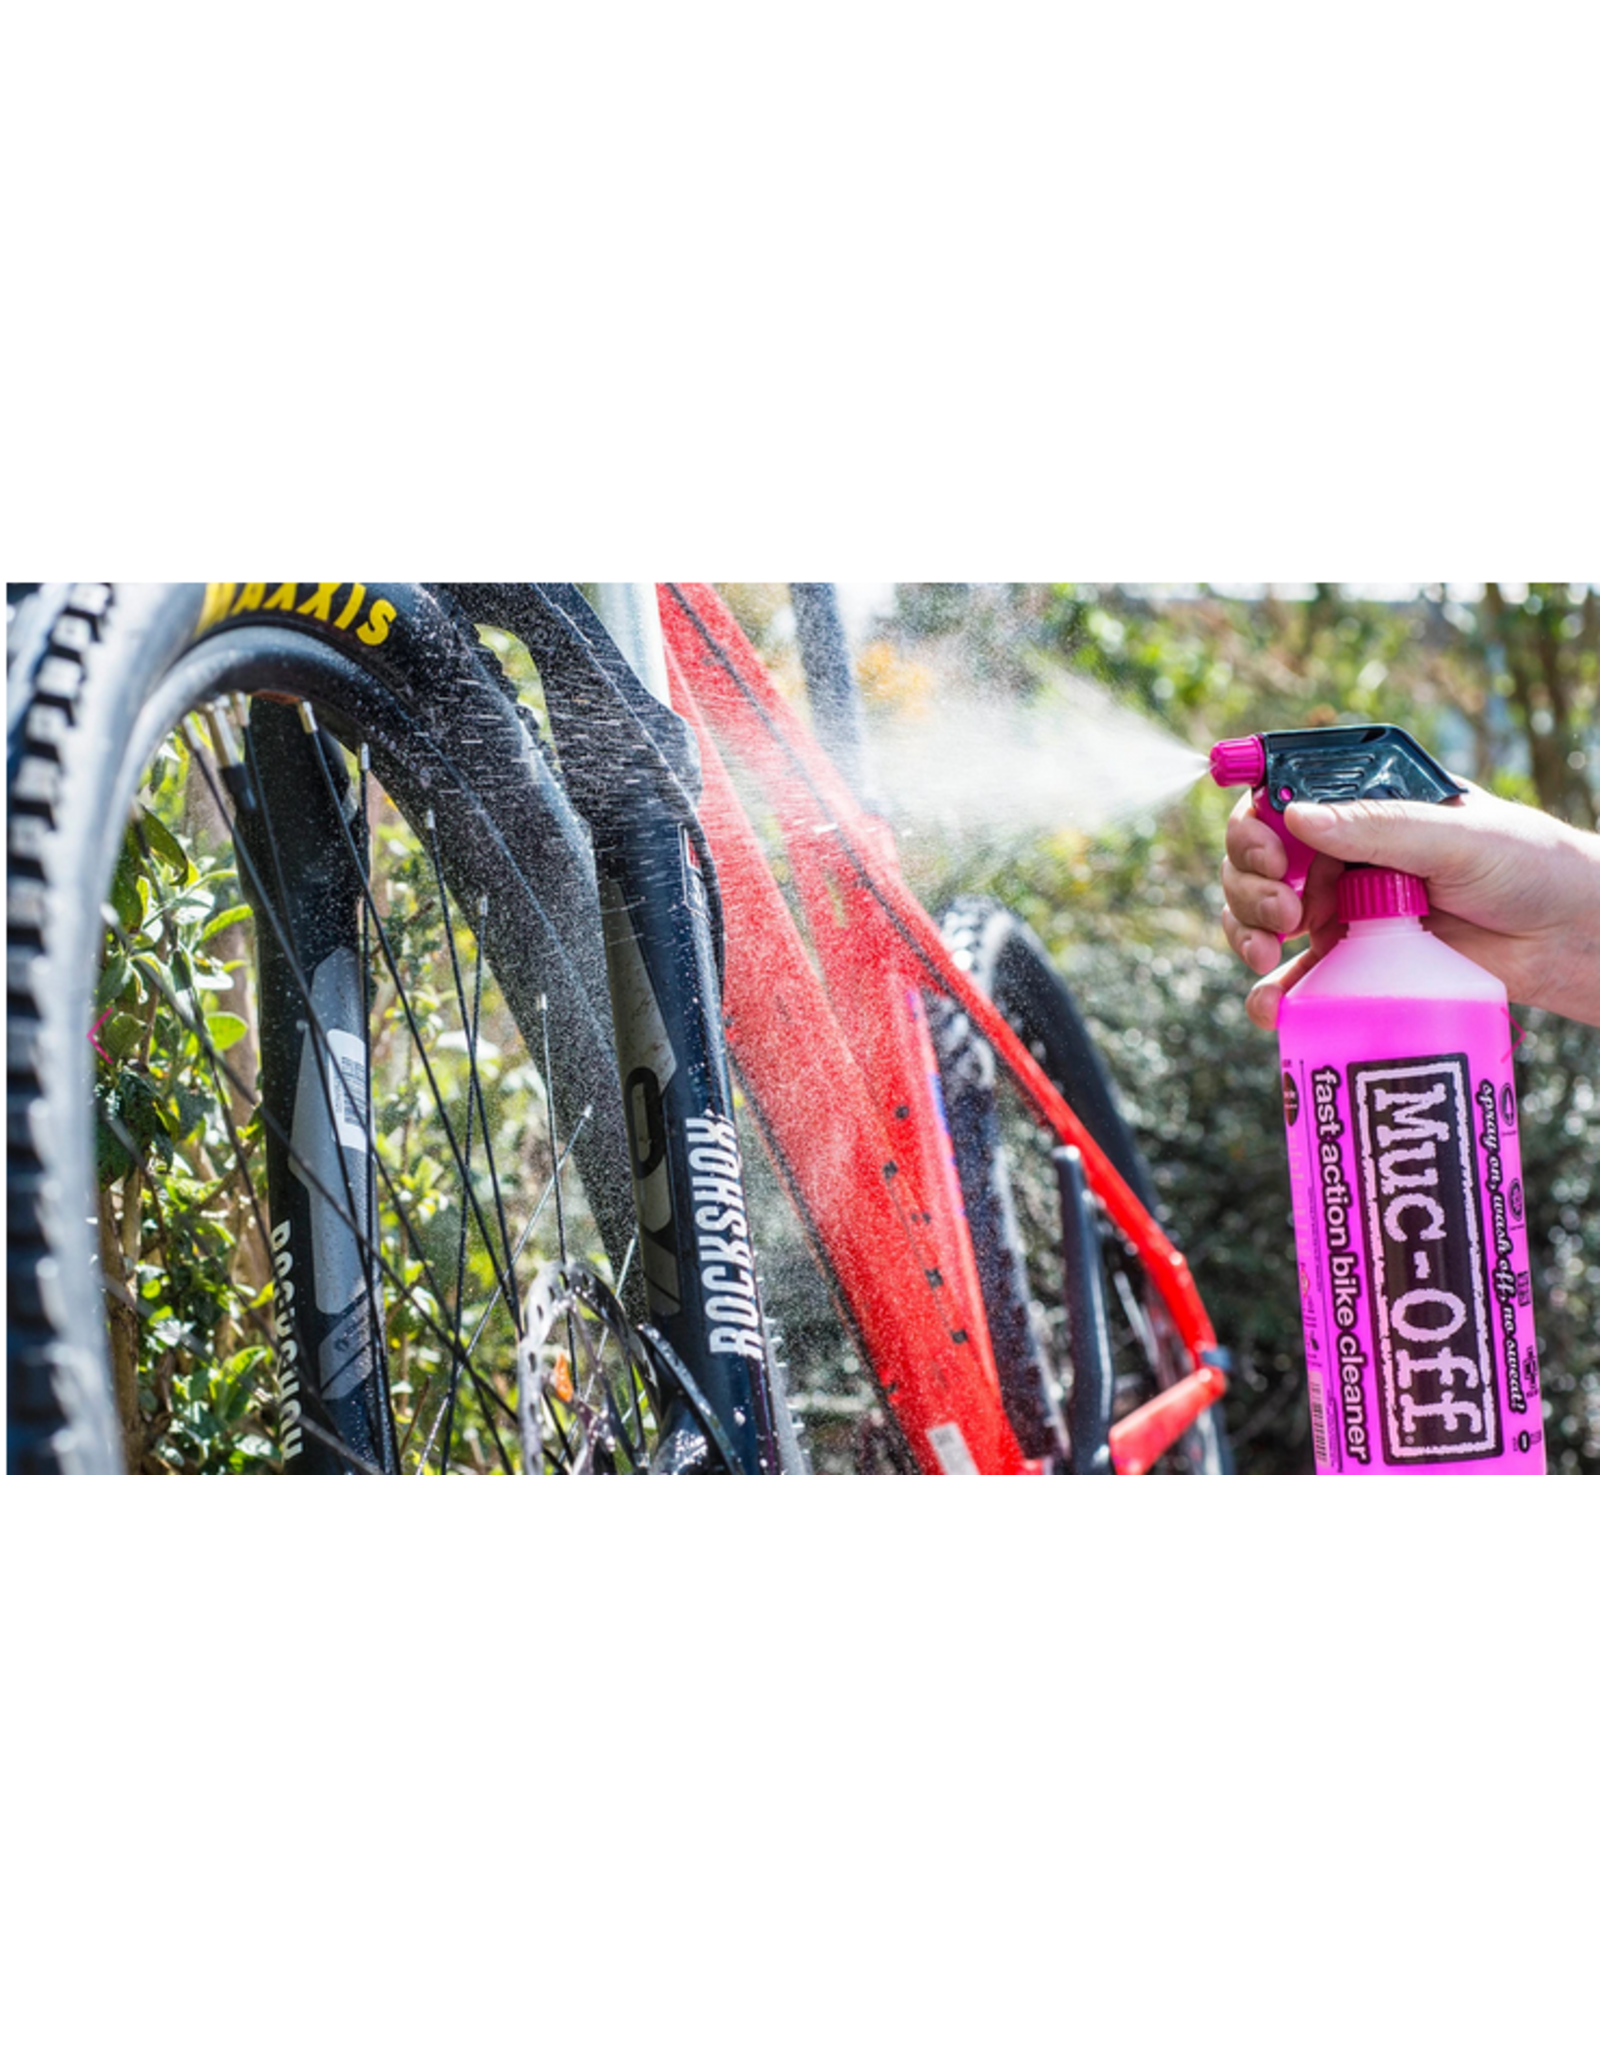 MUC-OFF Muc-Off, 8-in-1 Bicycle Cleaning Kit